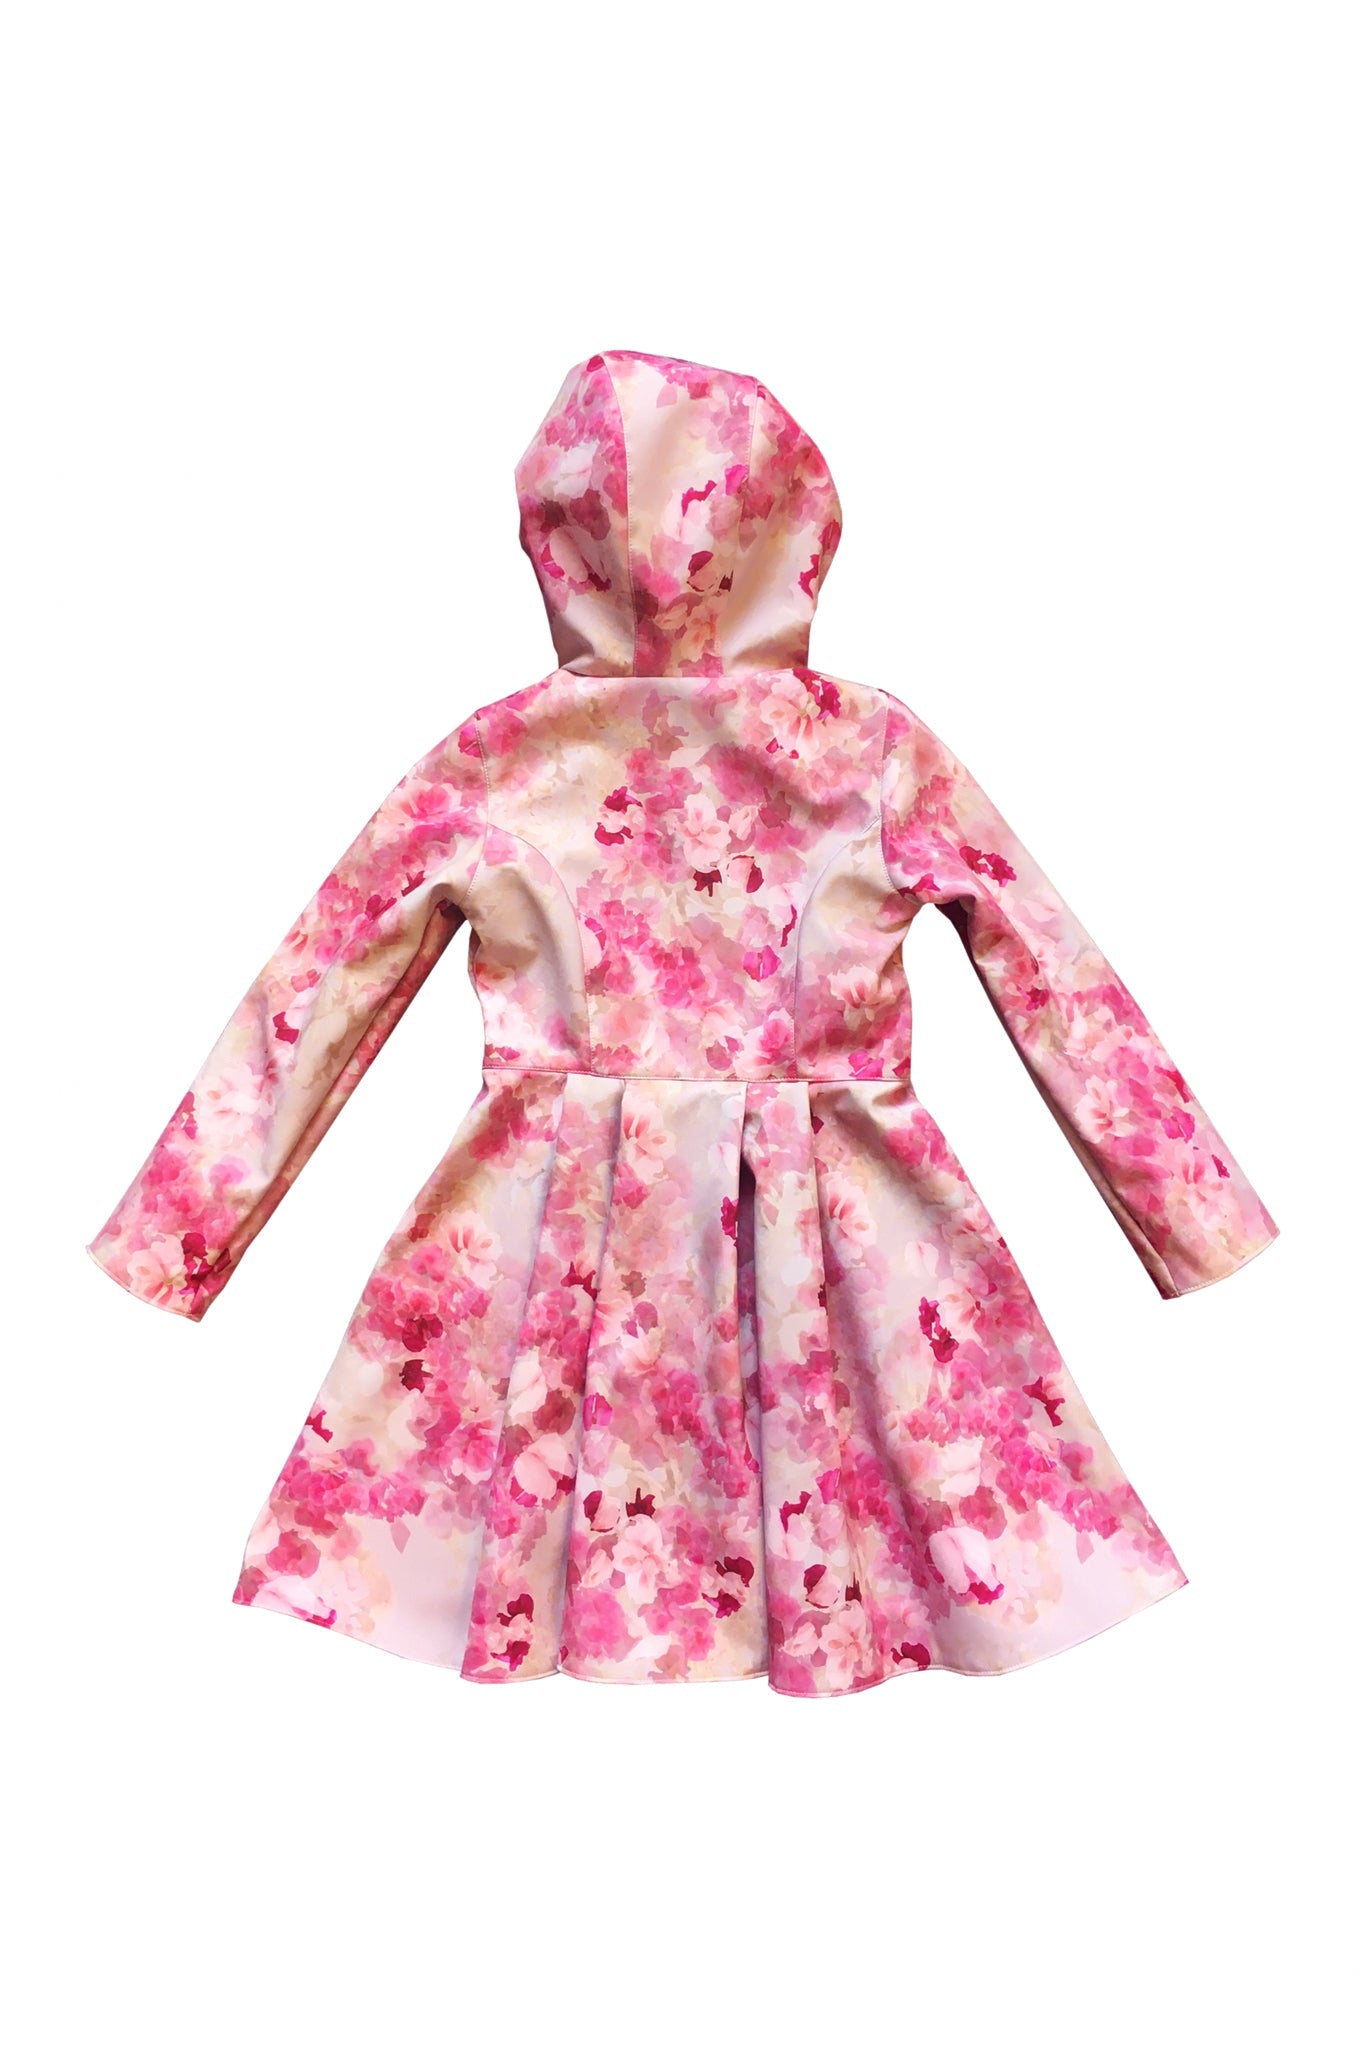 Pink Fit and Flare Raincoat for Girls back